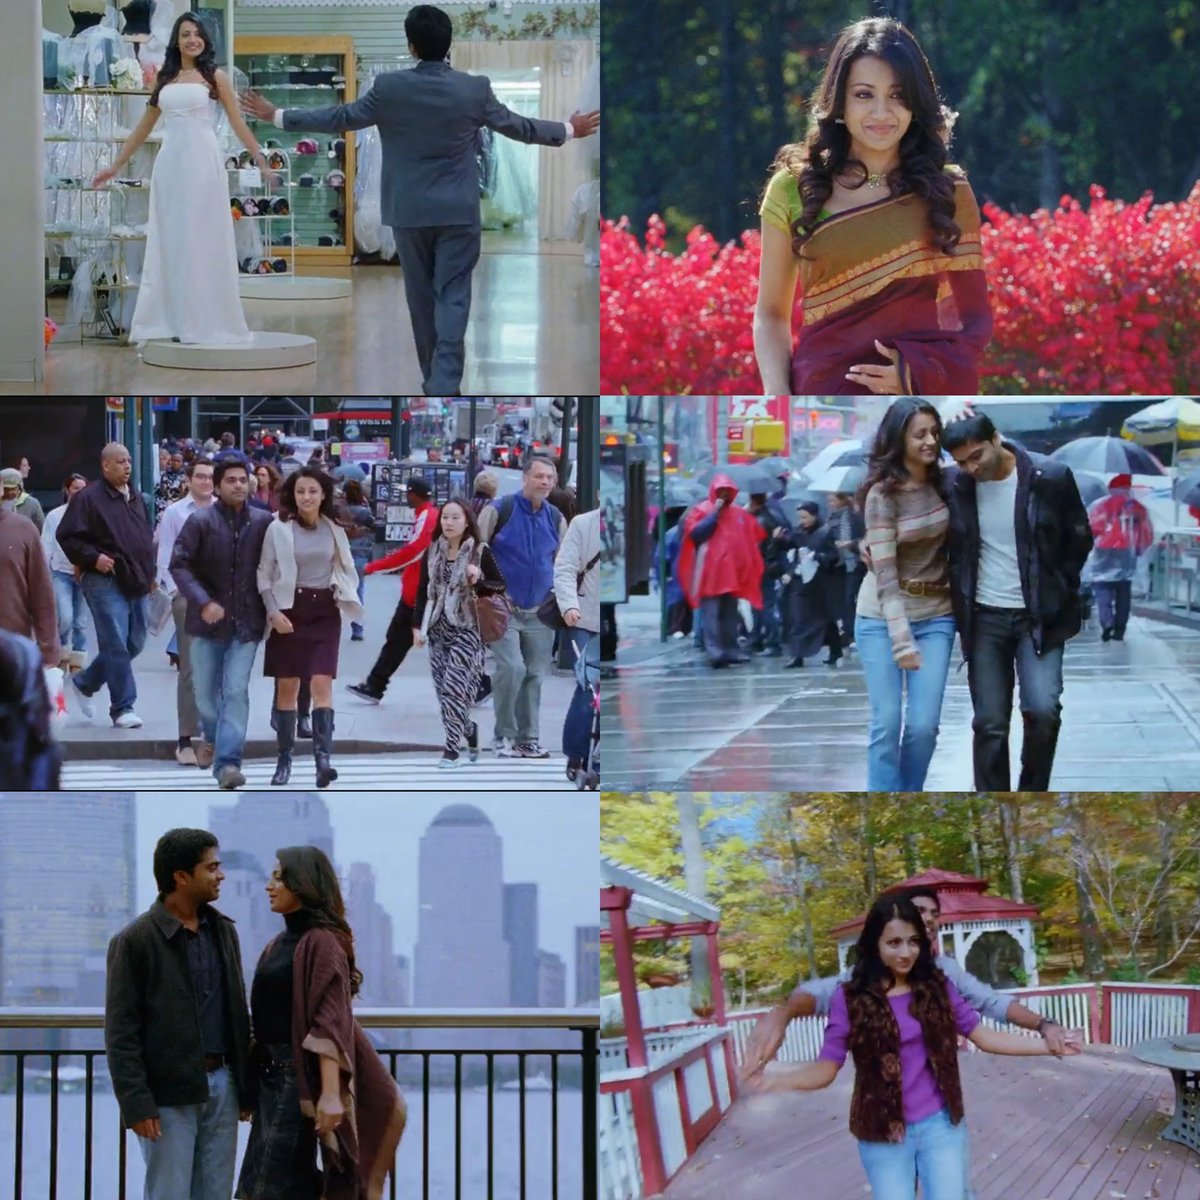 Dream /& ImaginationThe scenes were captured in foreign country, New York and the costumes were designed accordingly. Special mention goes to Jessie's wedding saree. The only saree that appears in the entire Anbil Avan song. Exquisite.'One more dreamthat I cannot make true'